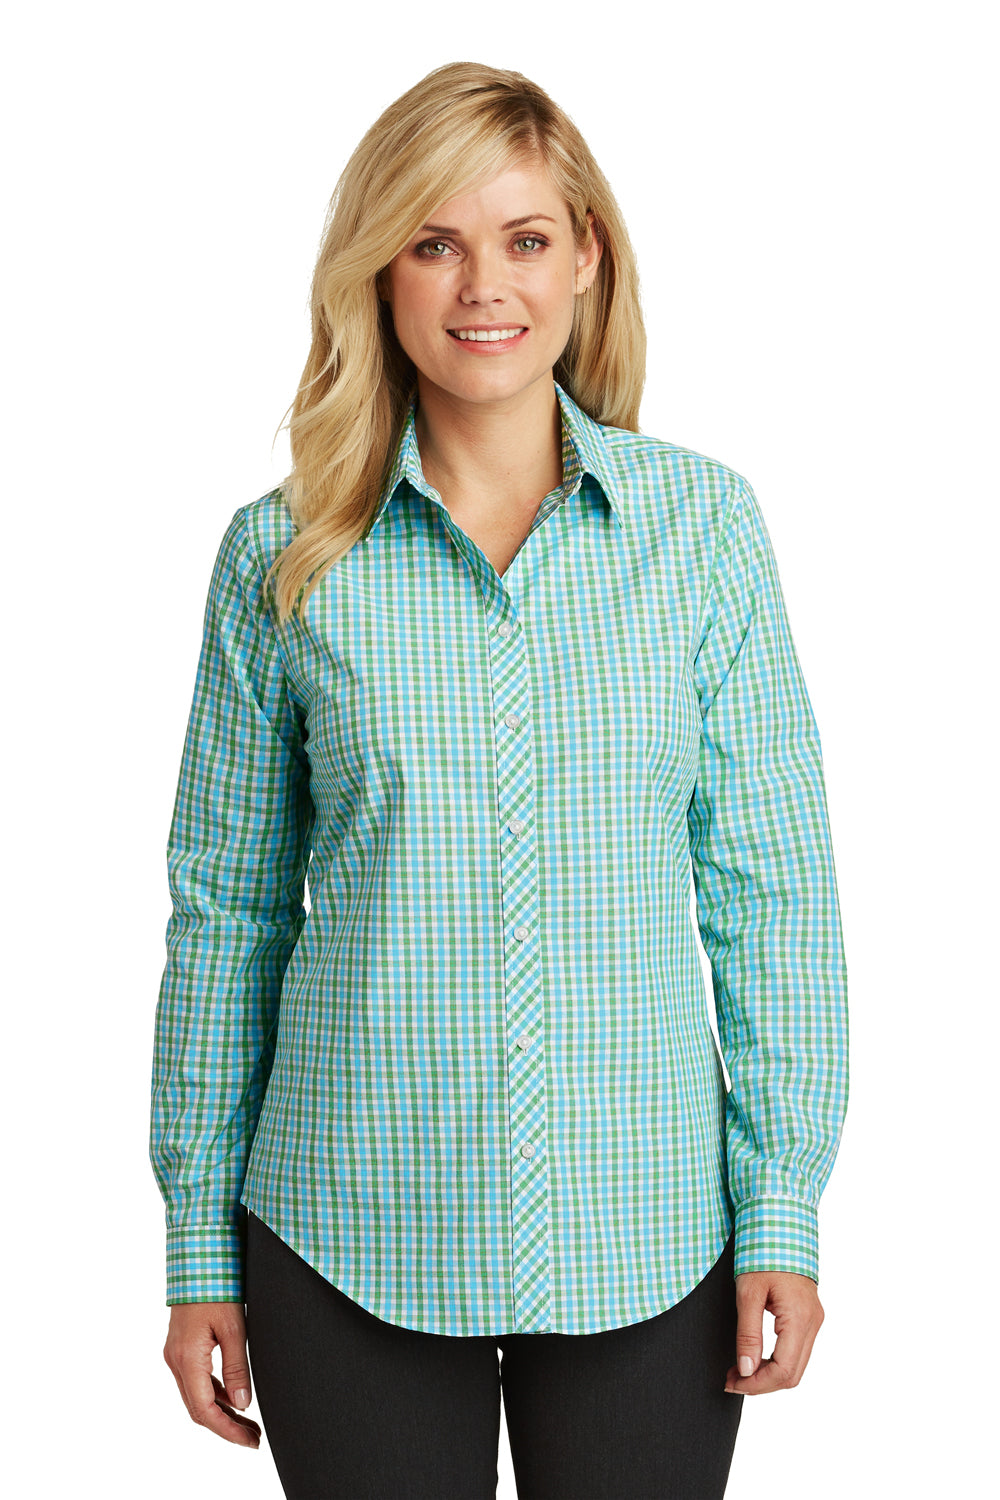 Port Authority L654 Womens Easy Care Wrinkle Resistant Long Sleeve Button Down Shirt Green/Aqua Blue Front